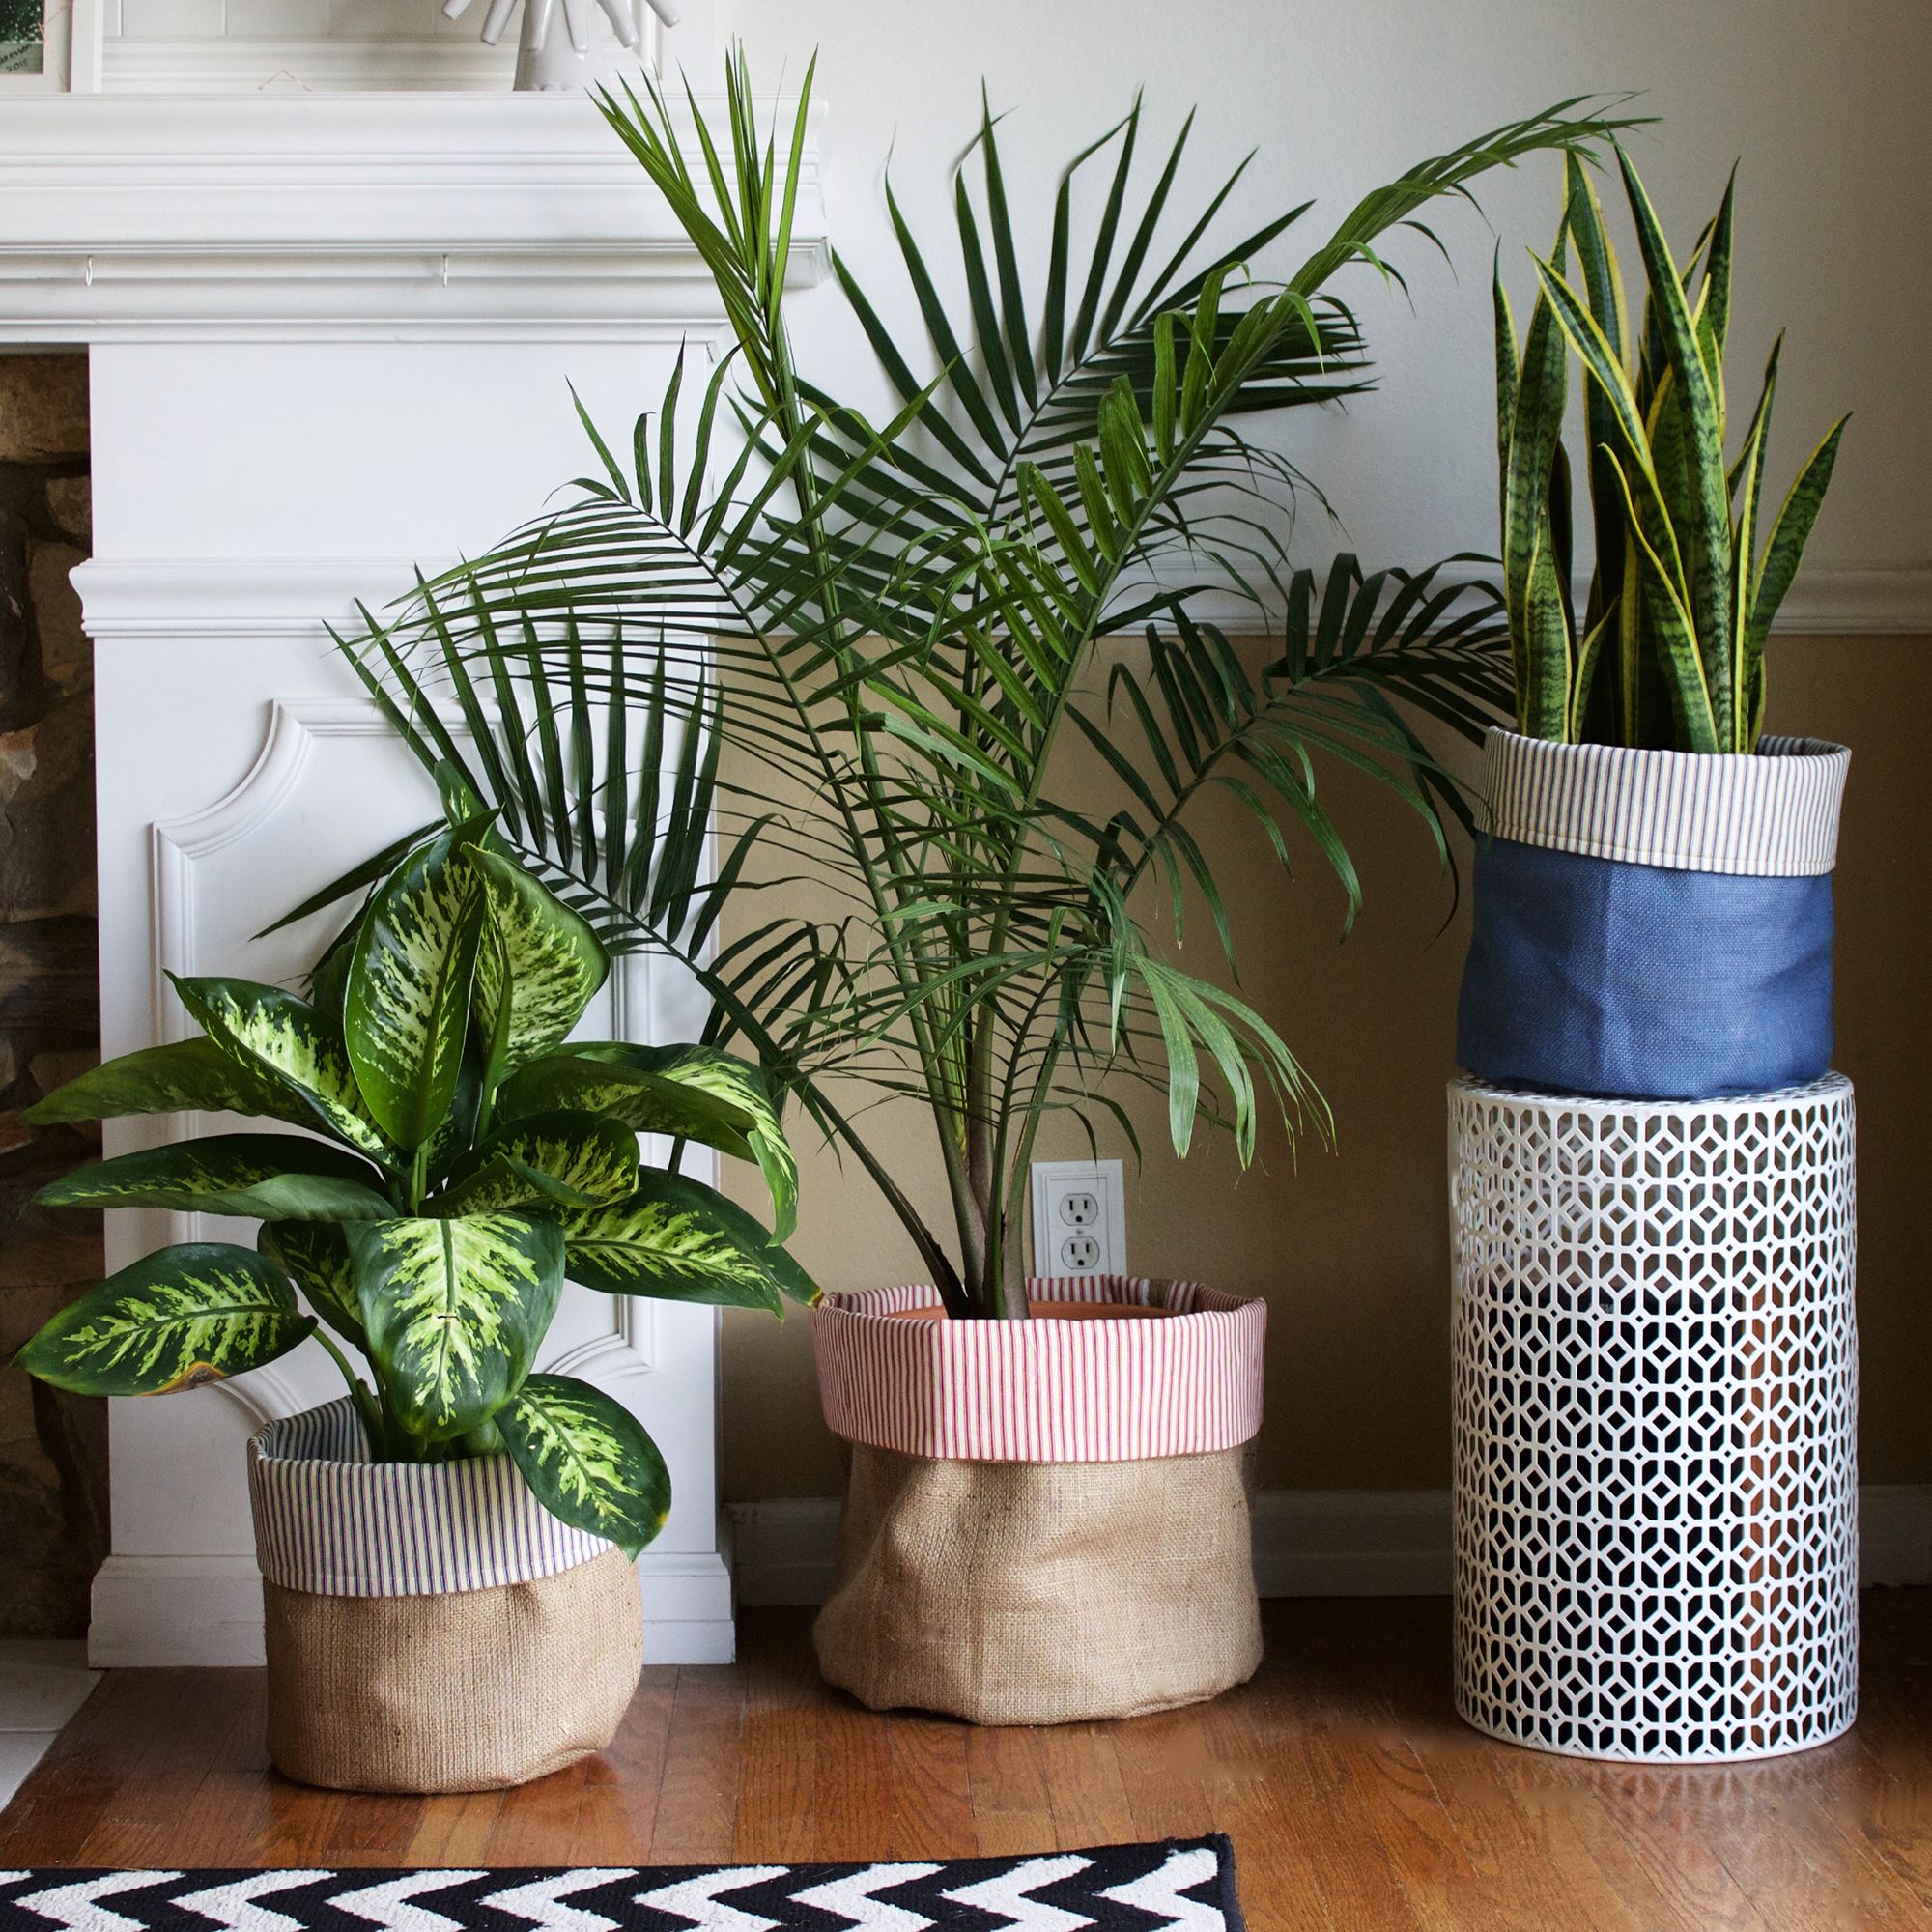 How to Make Fabric Planters